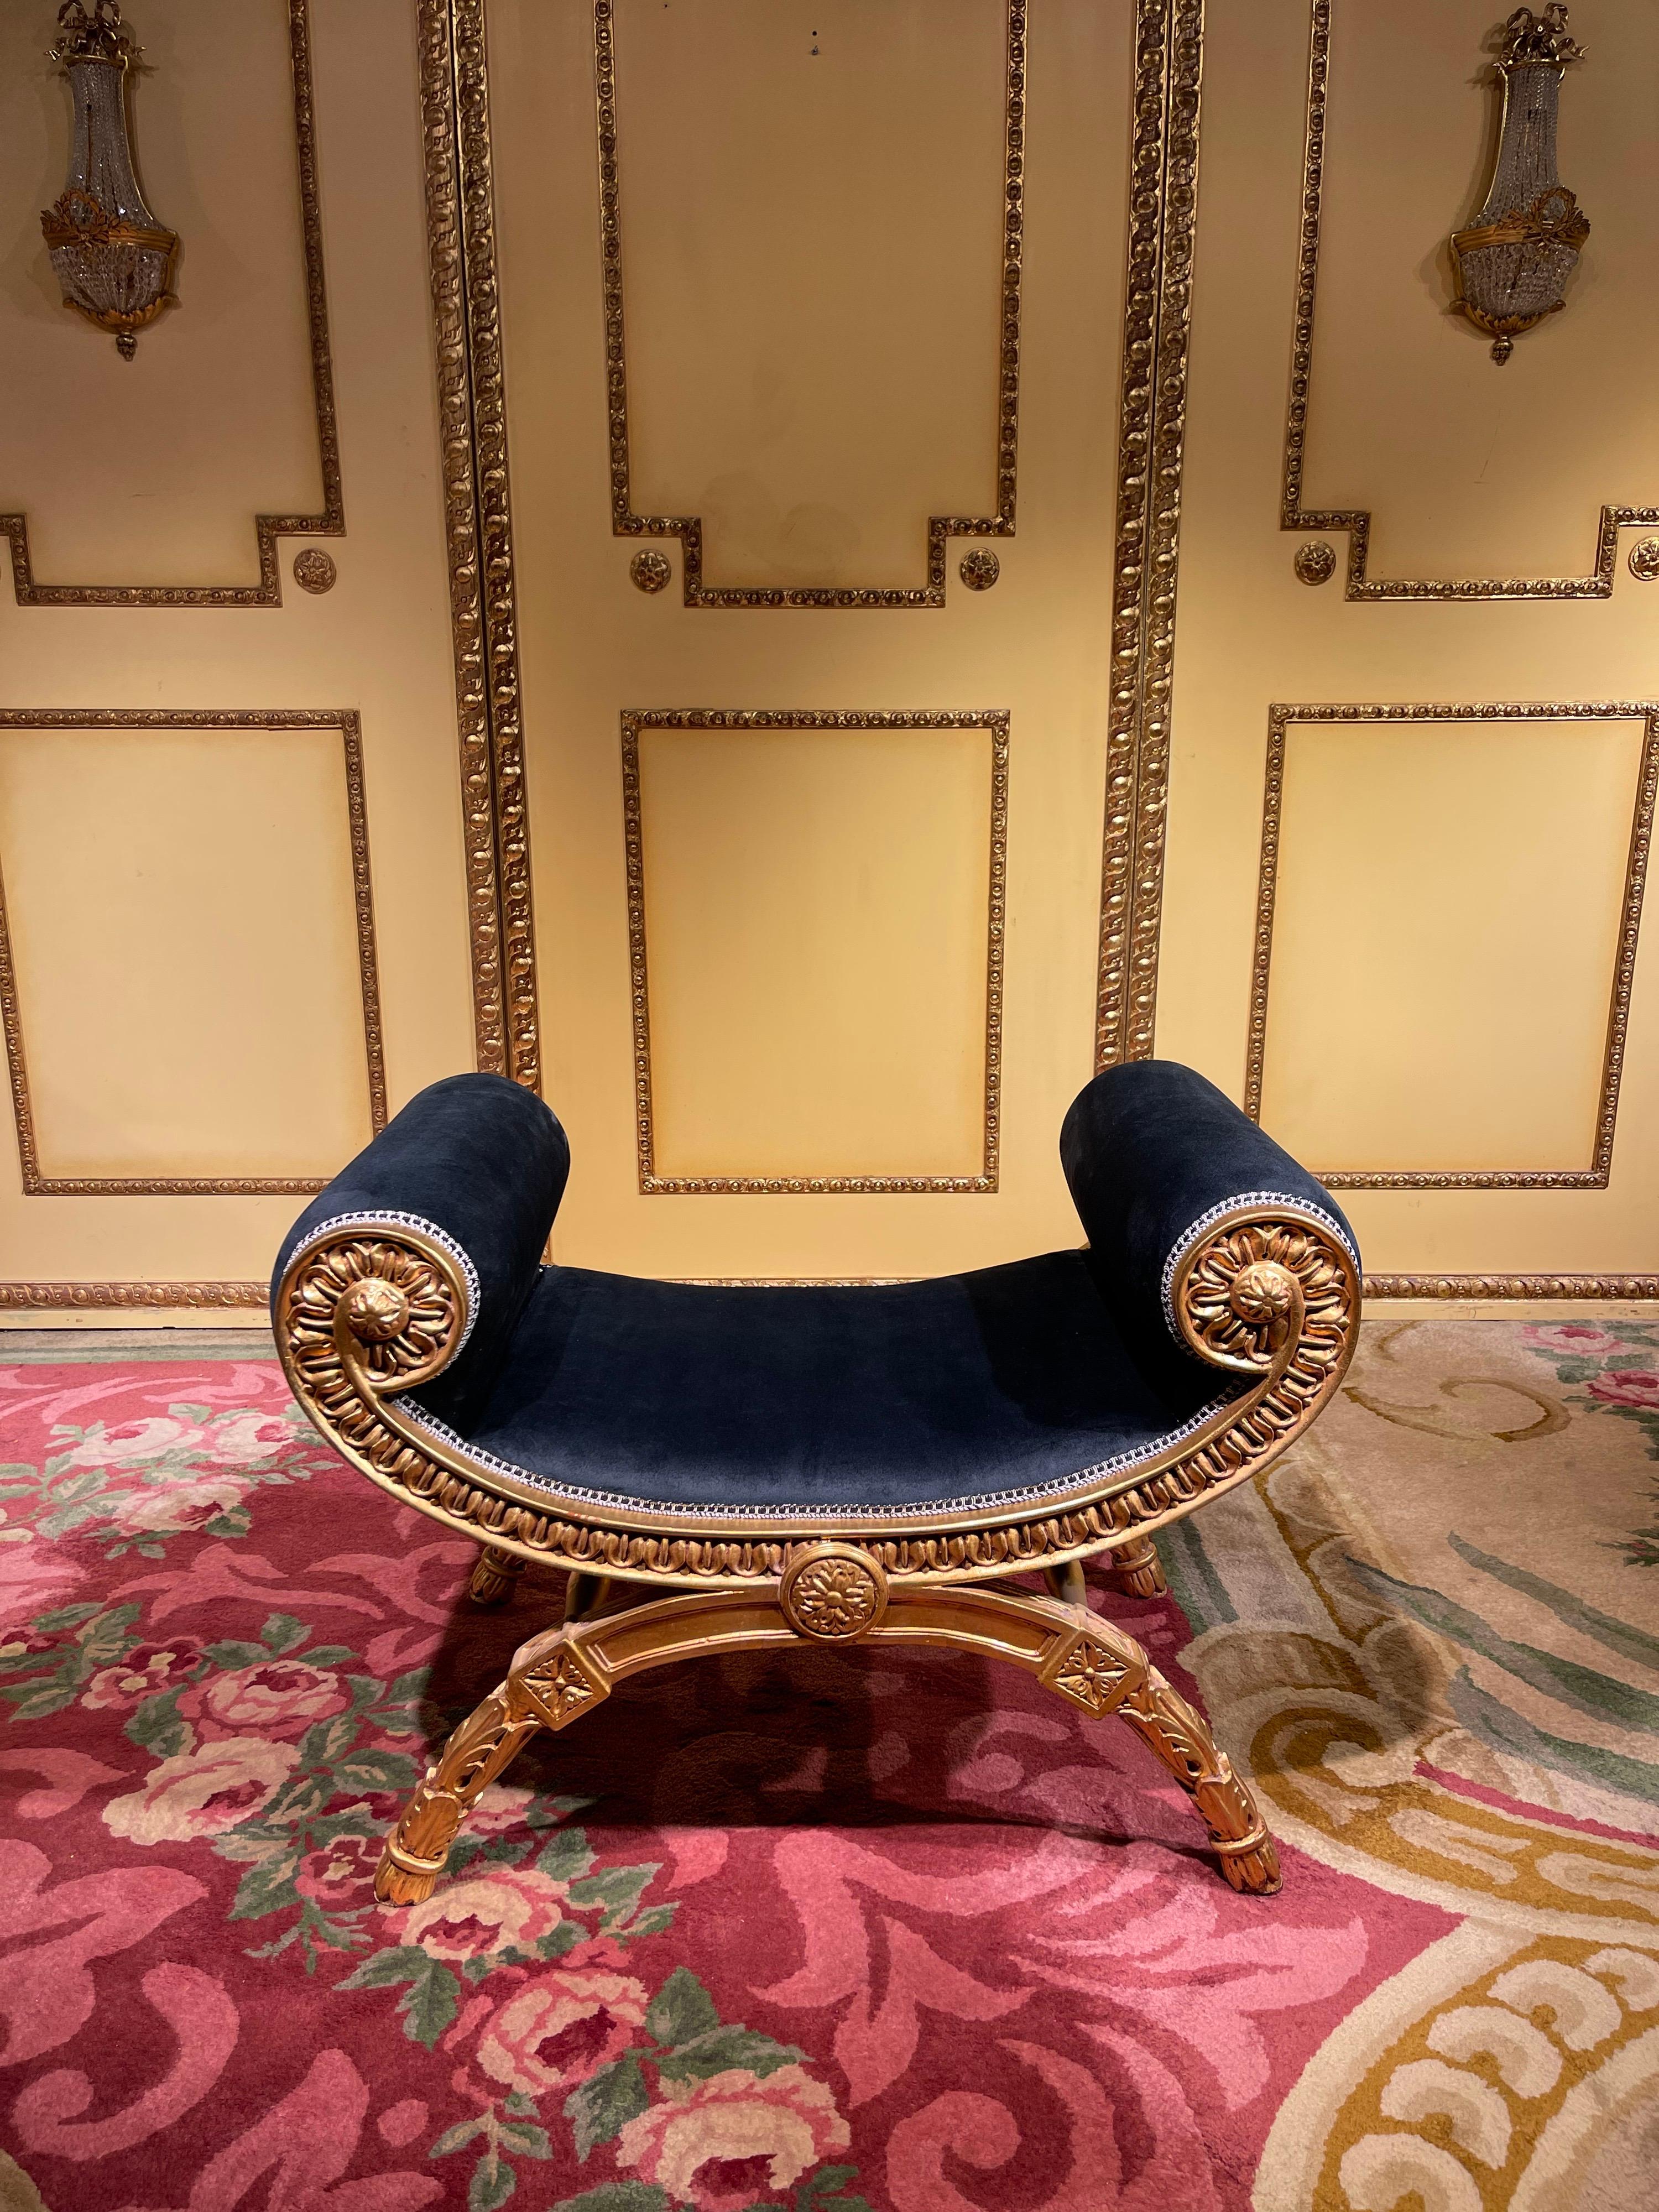 Solid beechwood, finely carved and set. Armrests ending in scrolled volutes. Semicircular frame on four scissor-shaped legs. Below connected by appropriately curly, strongly profiled webs. The seat is finished with a historical, Classic black